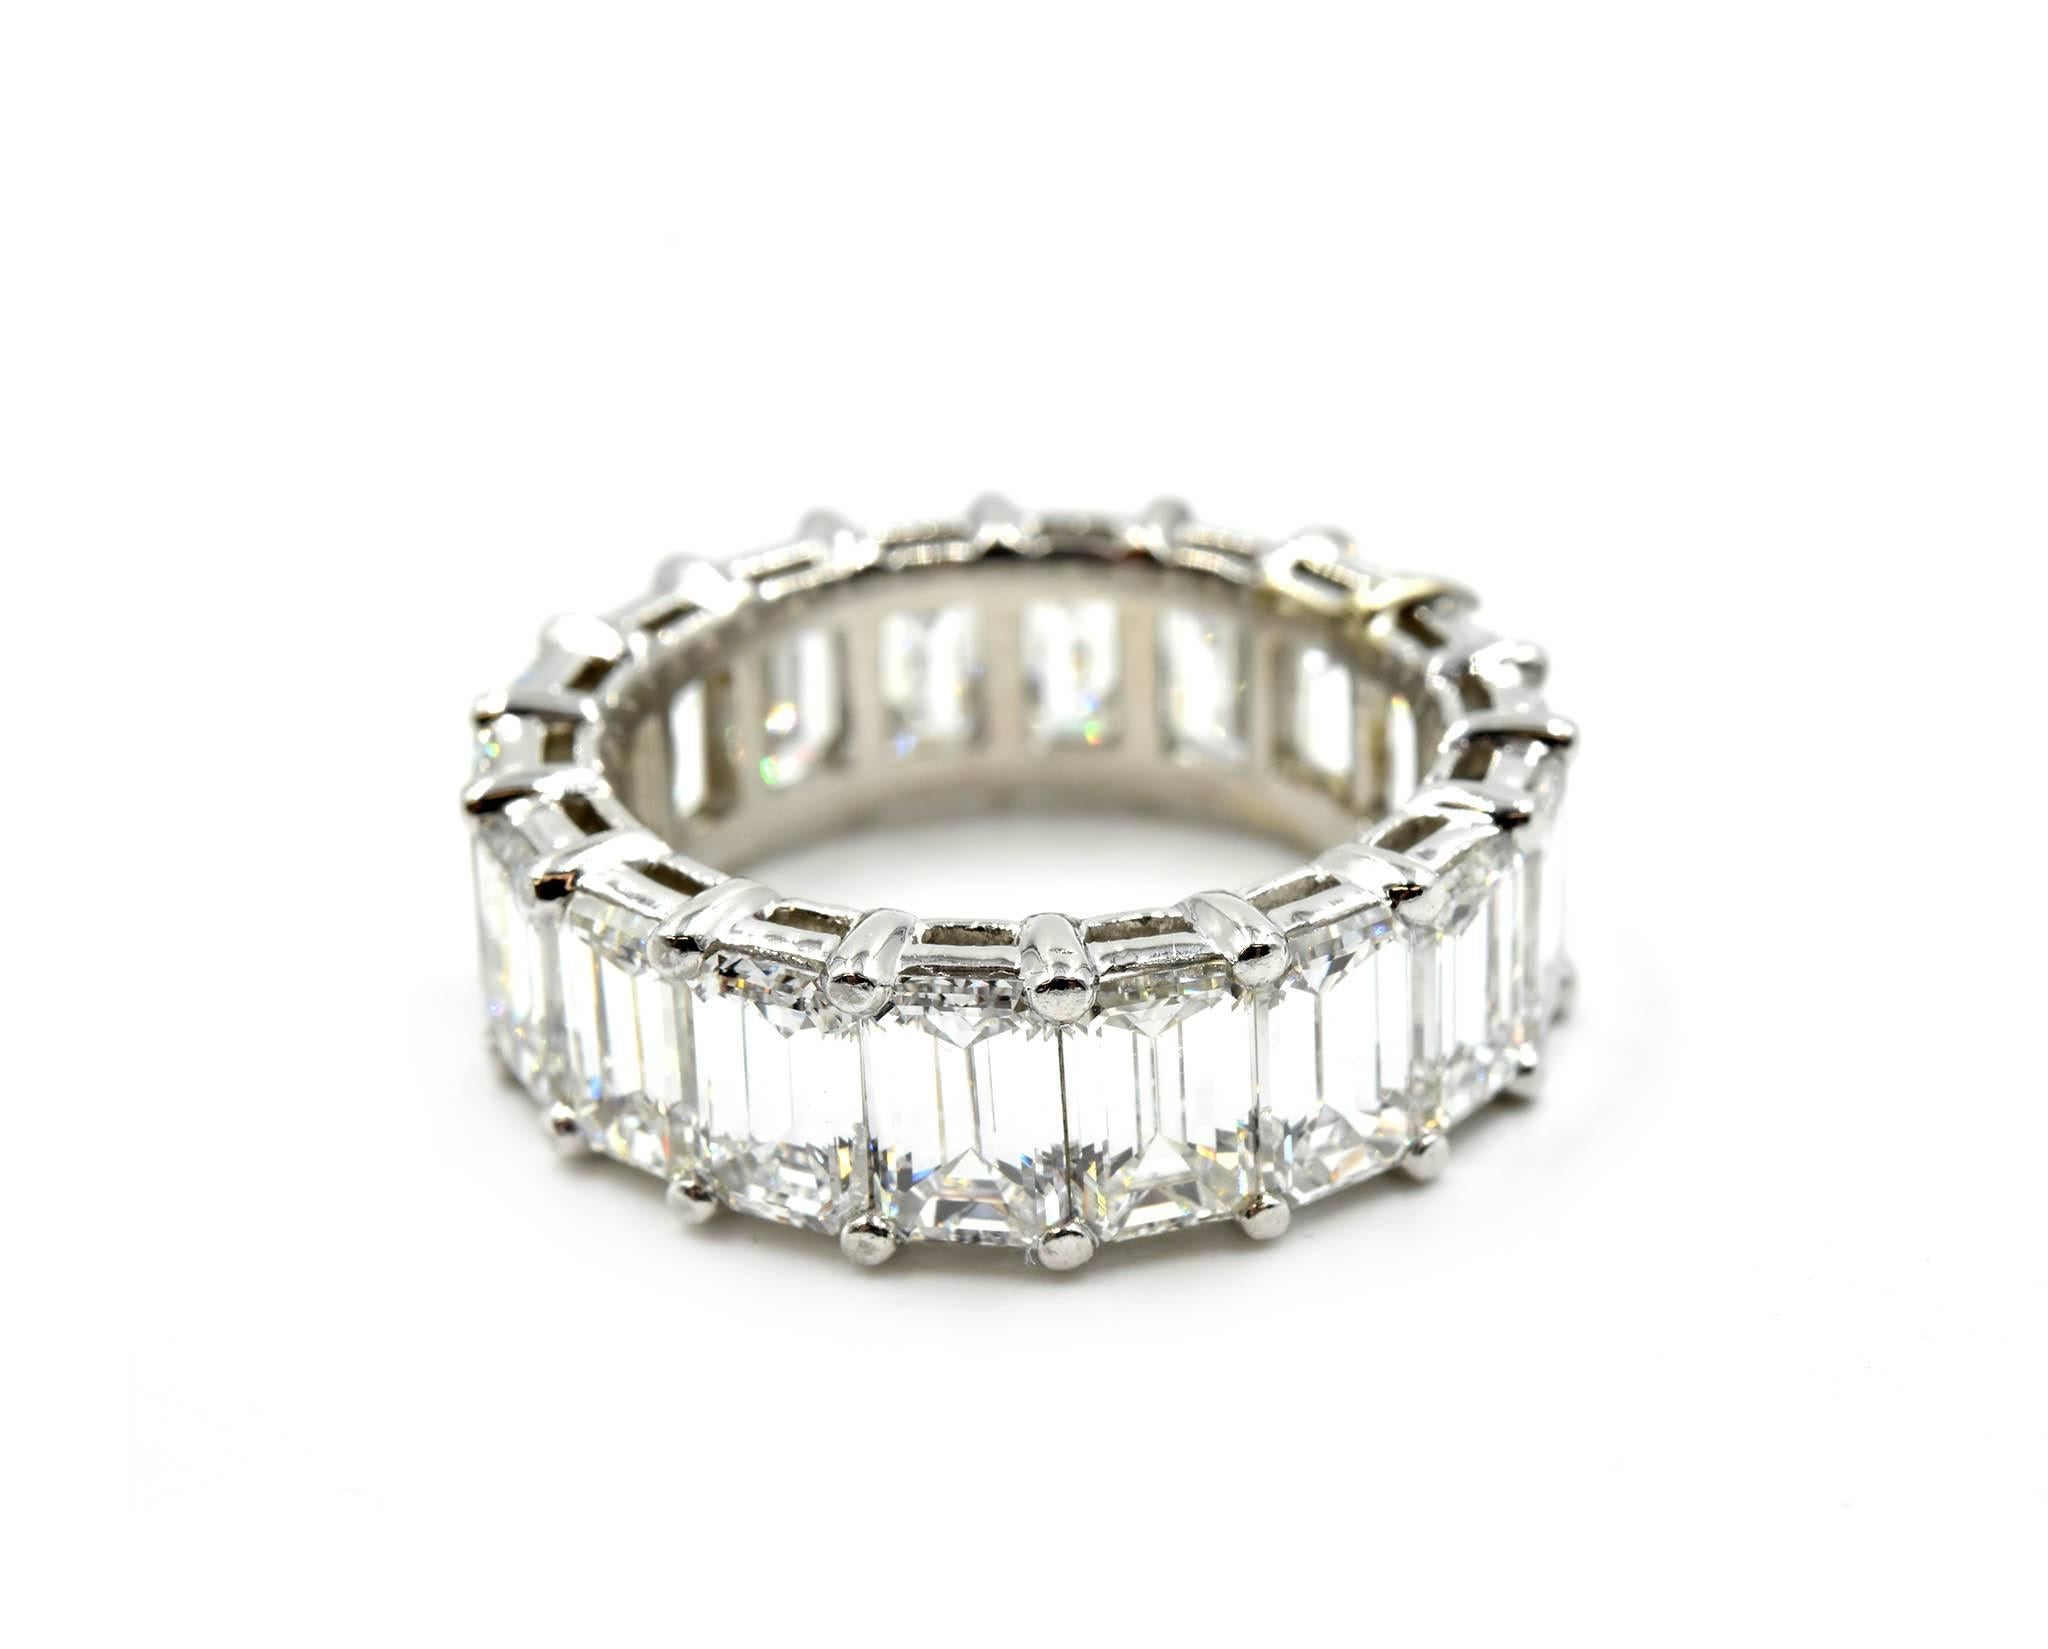 Designer: custom design
Material: platinum
Diamonds: 18 emerald cut diamonds = 12.80 carat total weight
Color: H-I
Clarity: VS
Dimensions: band is 1/4-inches wide
Ring size: 7 (please allow two additional shipping days for sizing requests)
Weight: